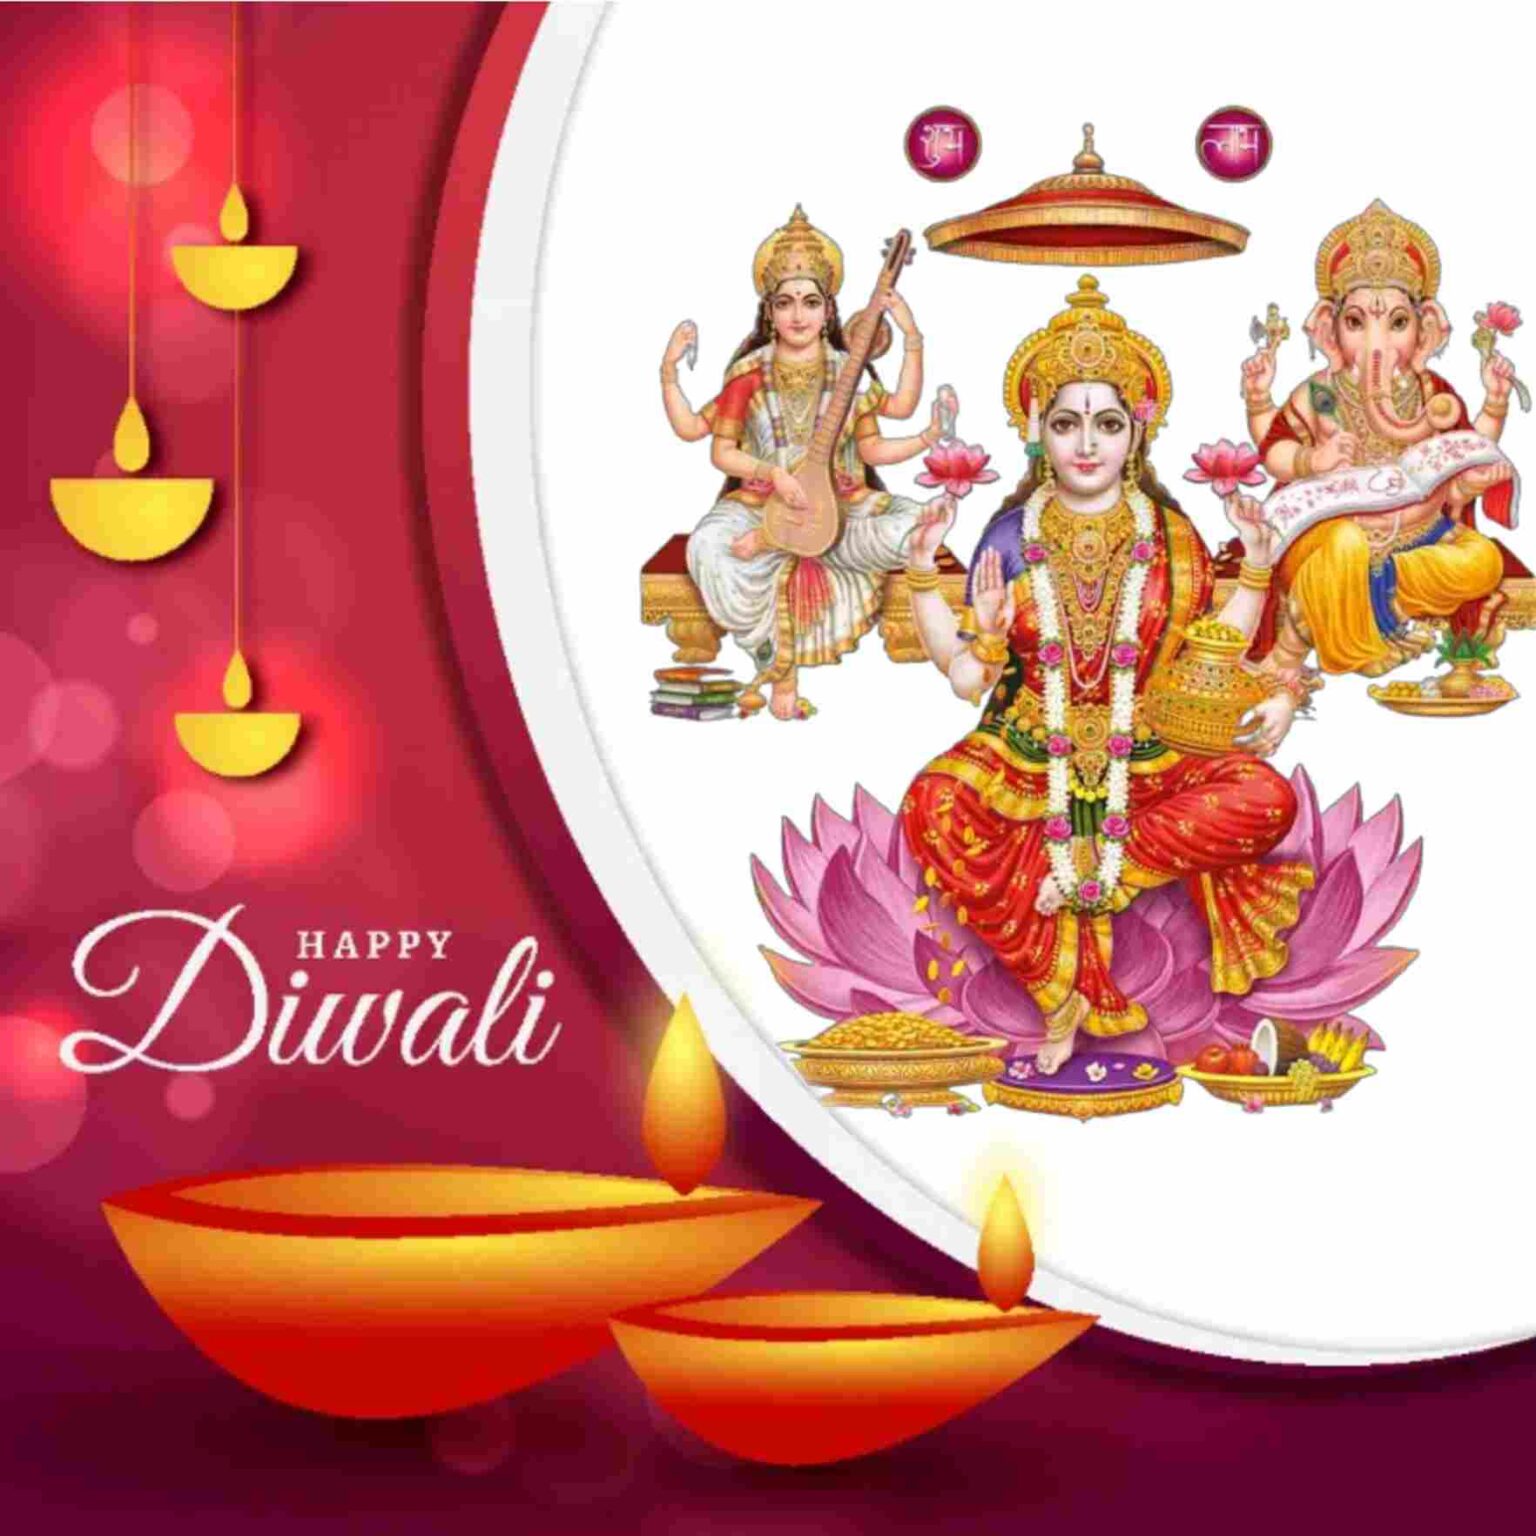 Download Happy Diwali Images | Happy Diwali Images in HD Wishes 2023